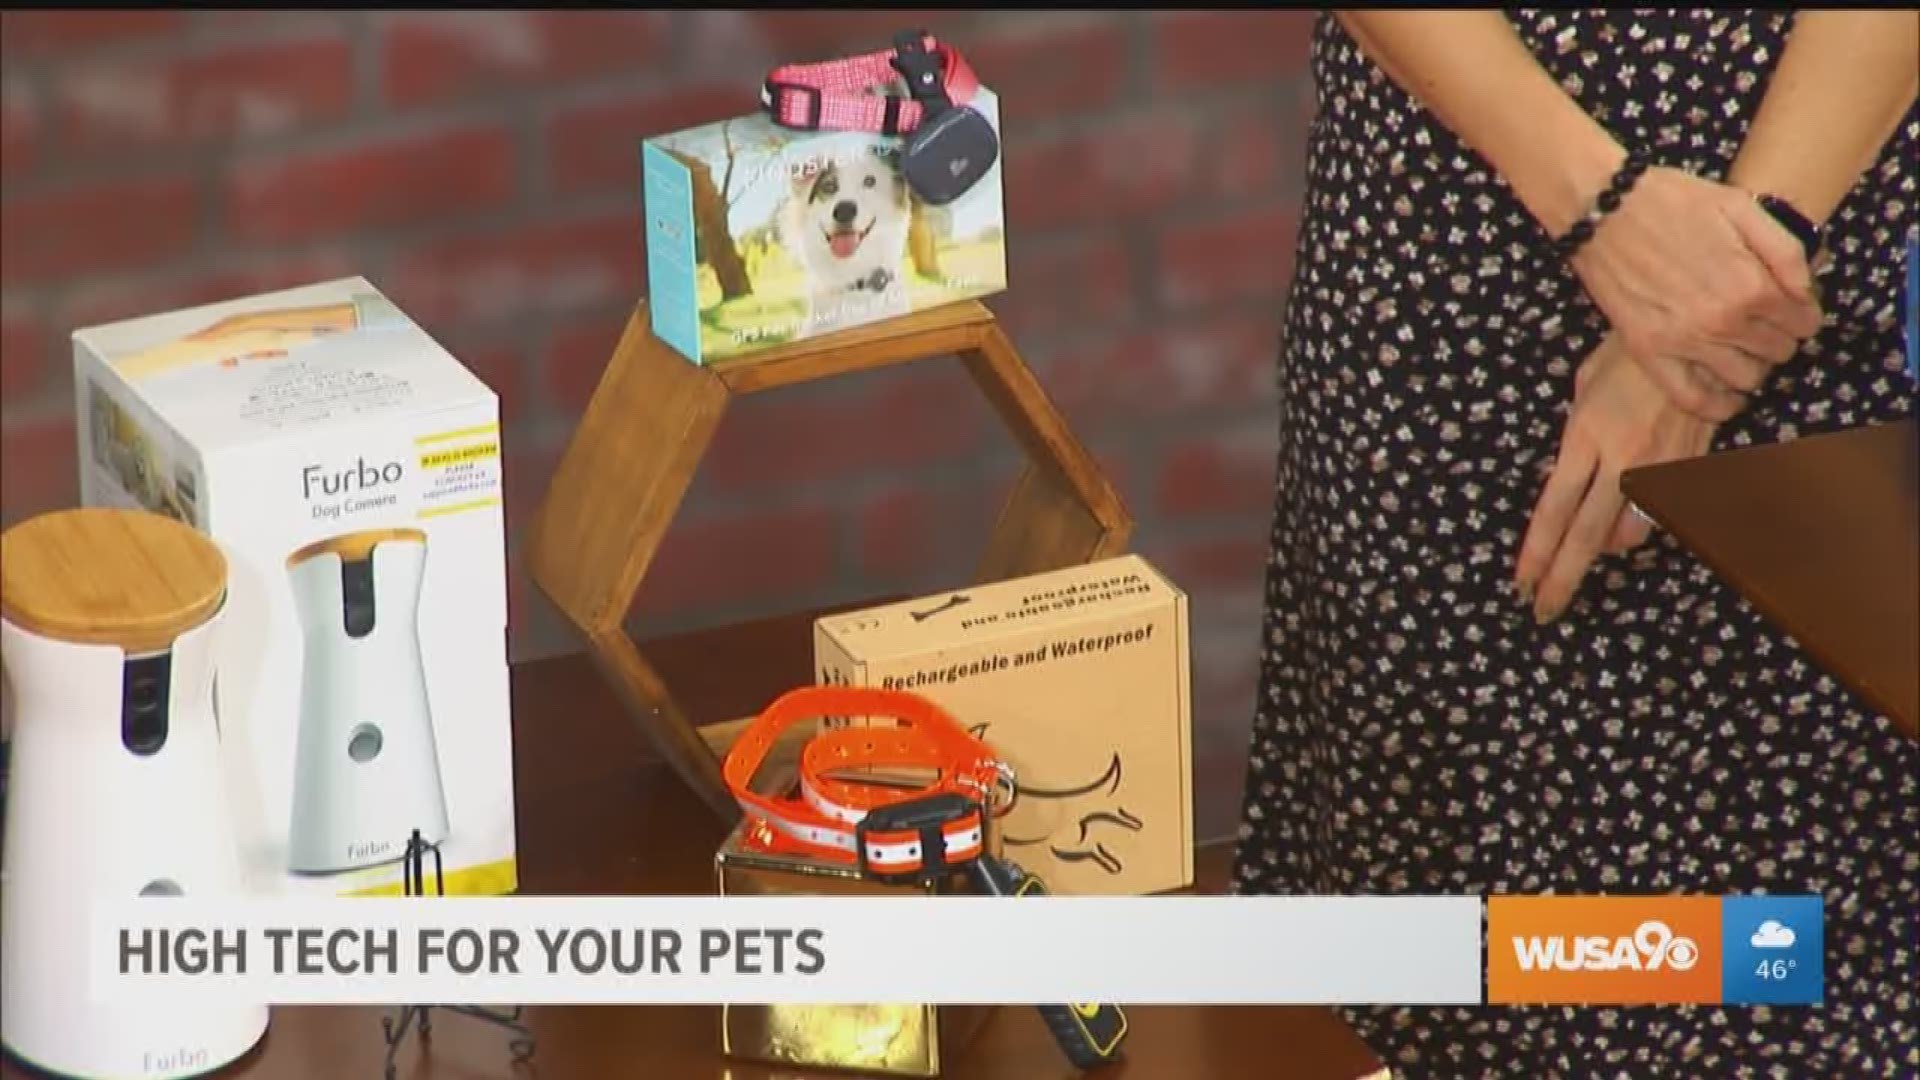 Tech expert and CEO of Toss C3, Greg Hanna, with Core 3, has some smart tech ideas to keep your pet happy and safe.